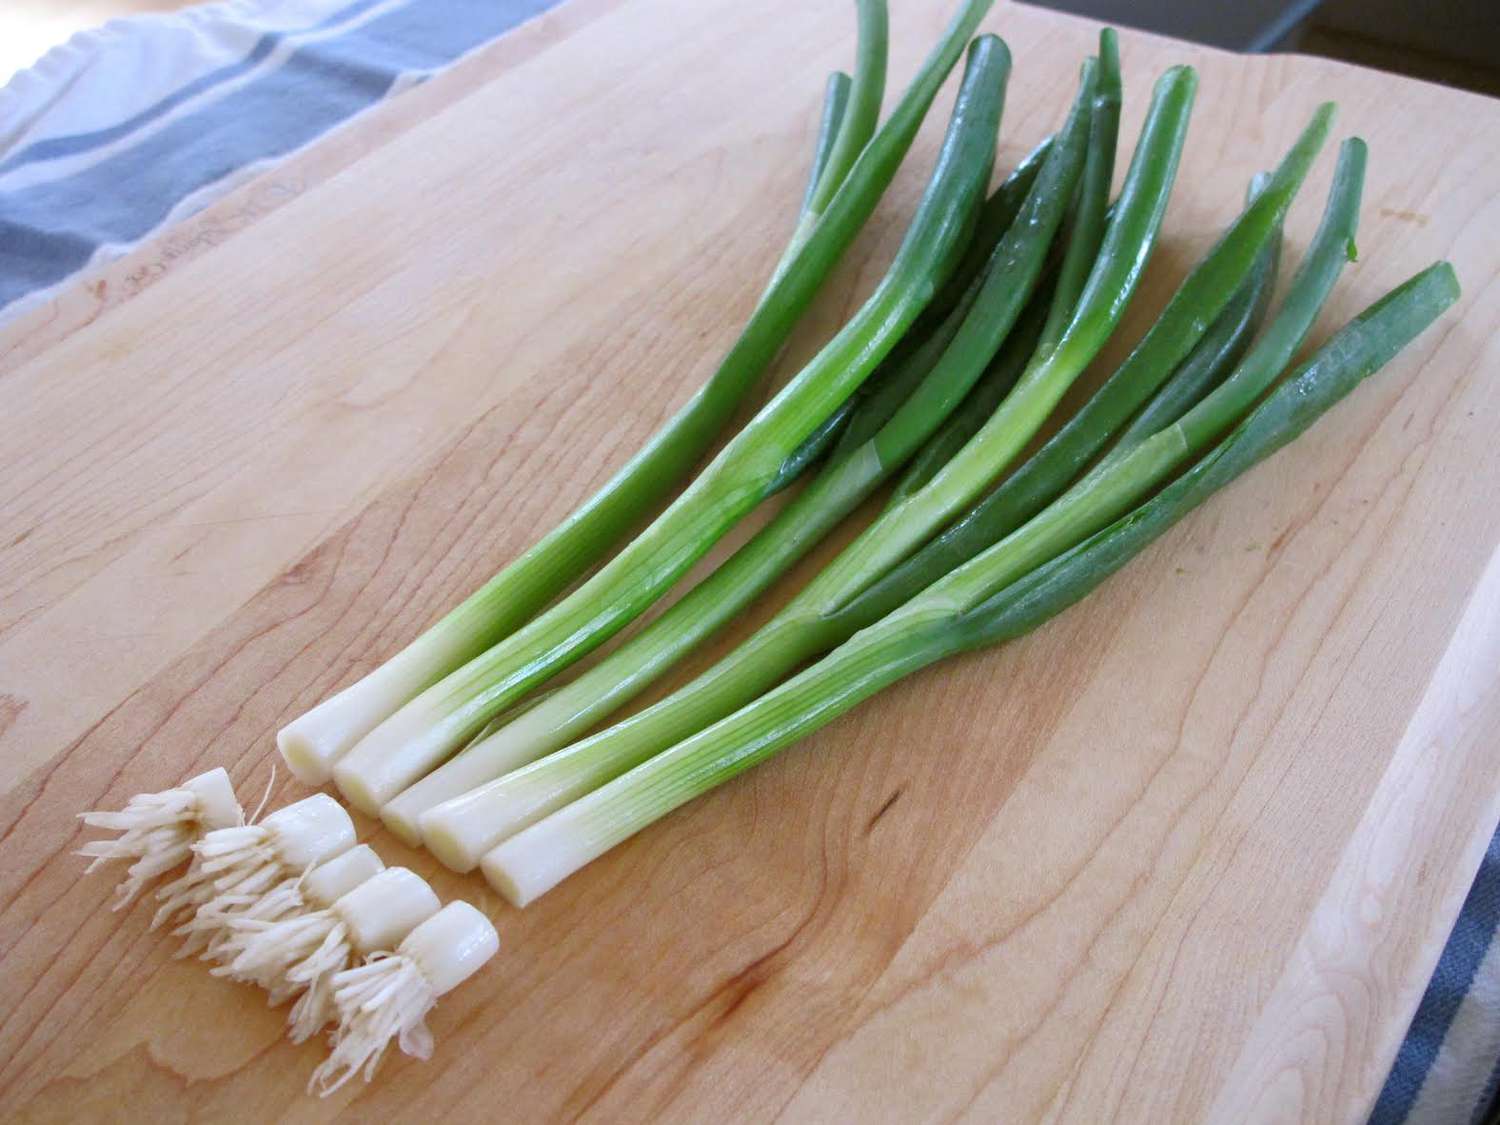 How To Regrow Green Onions From Scraps Allrecipes,Fried Green Tomatoes Book